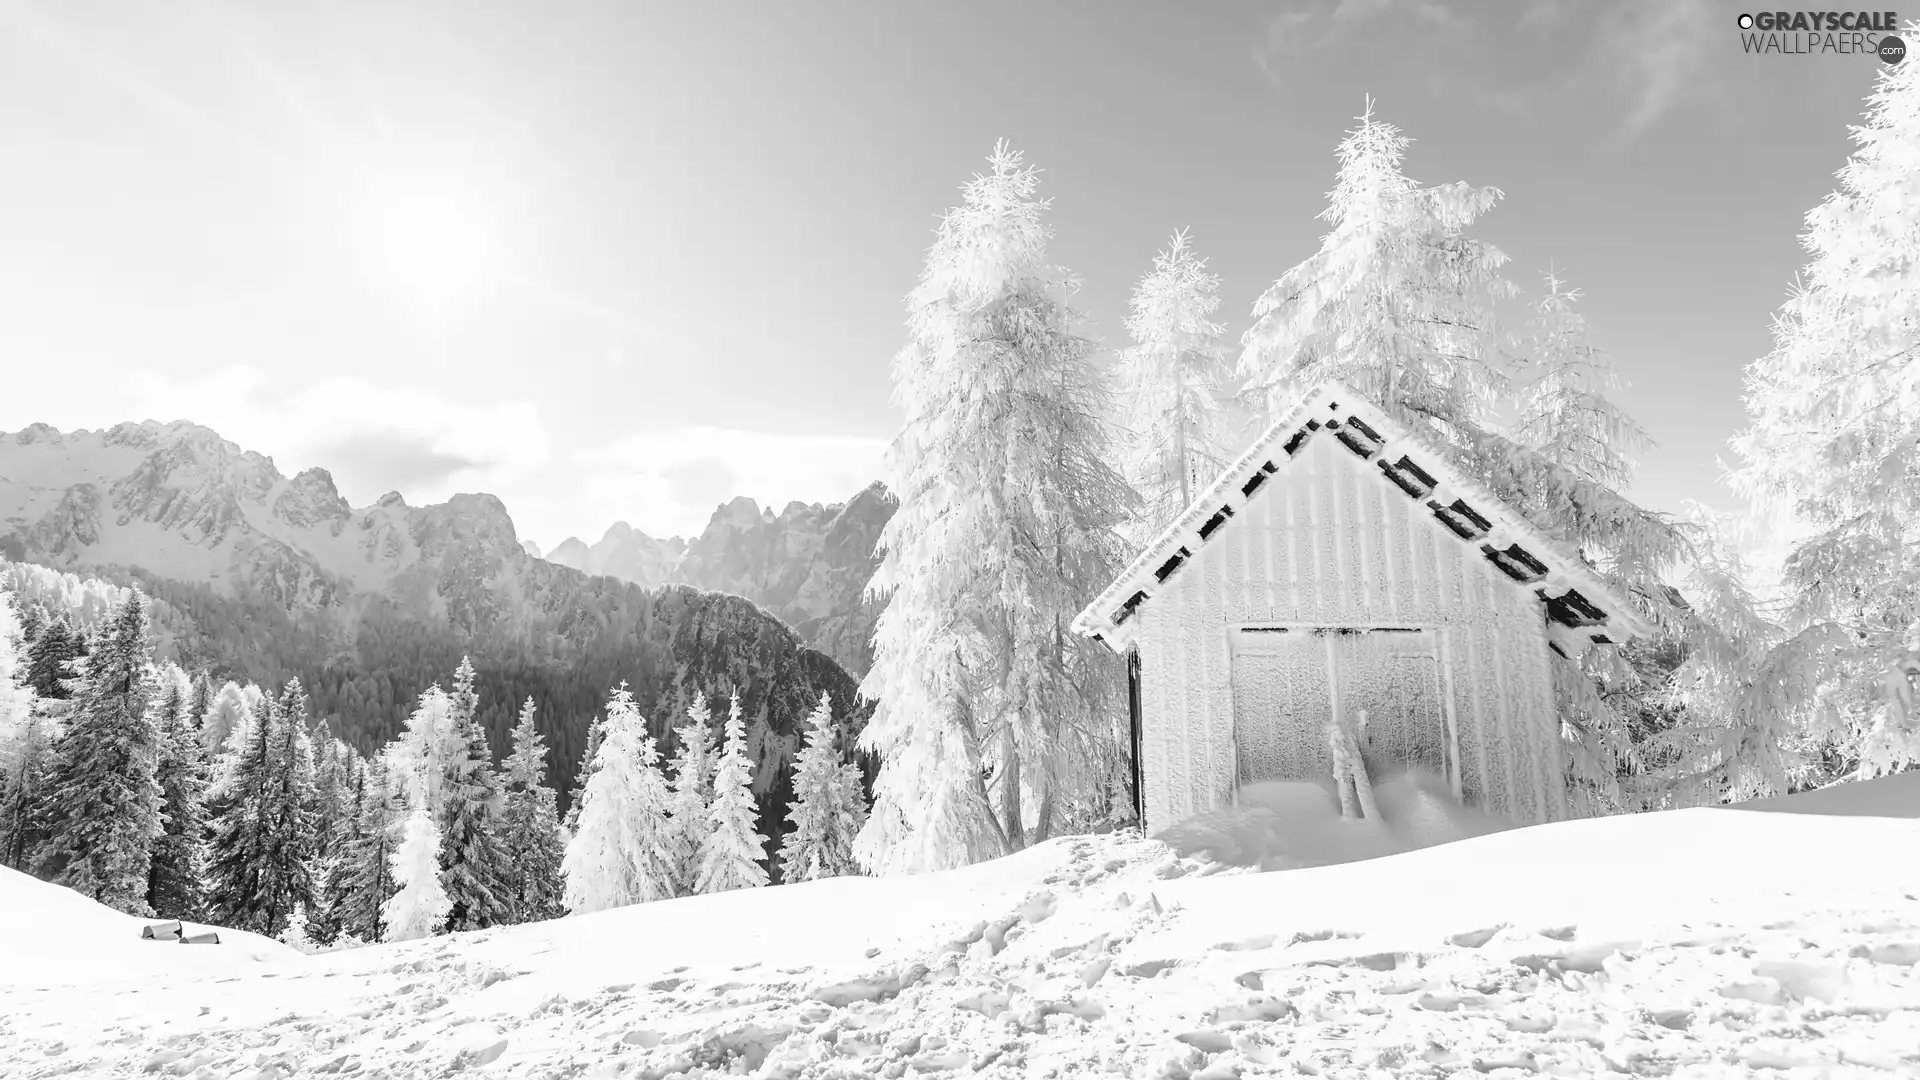 forest, Snowy, cote, trees, house, Mountains, winter, viewes